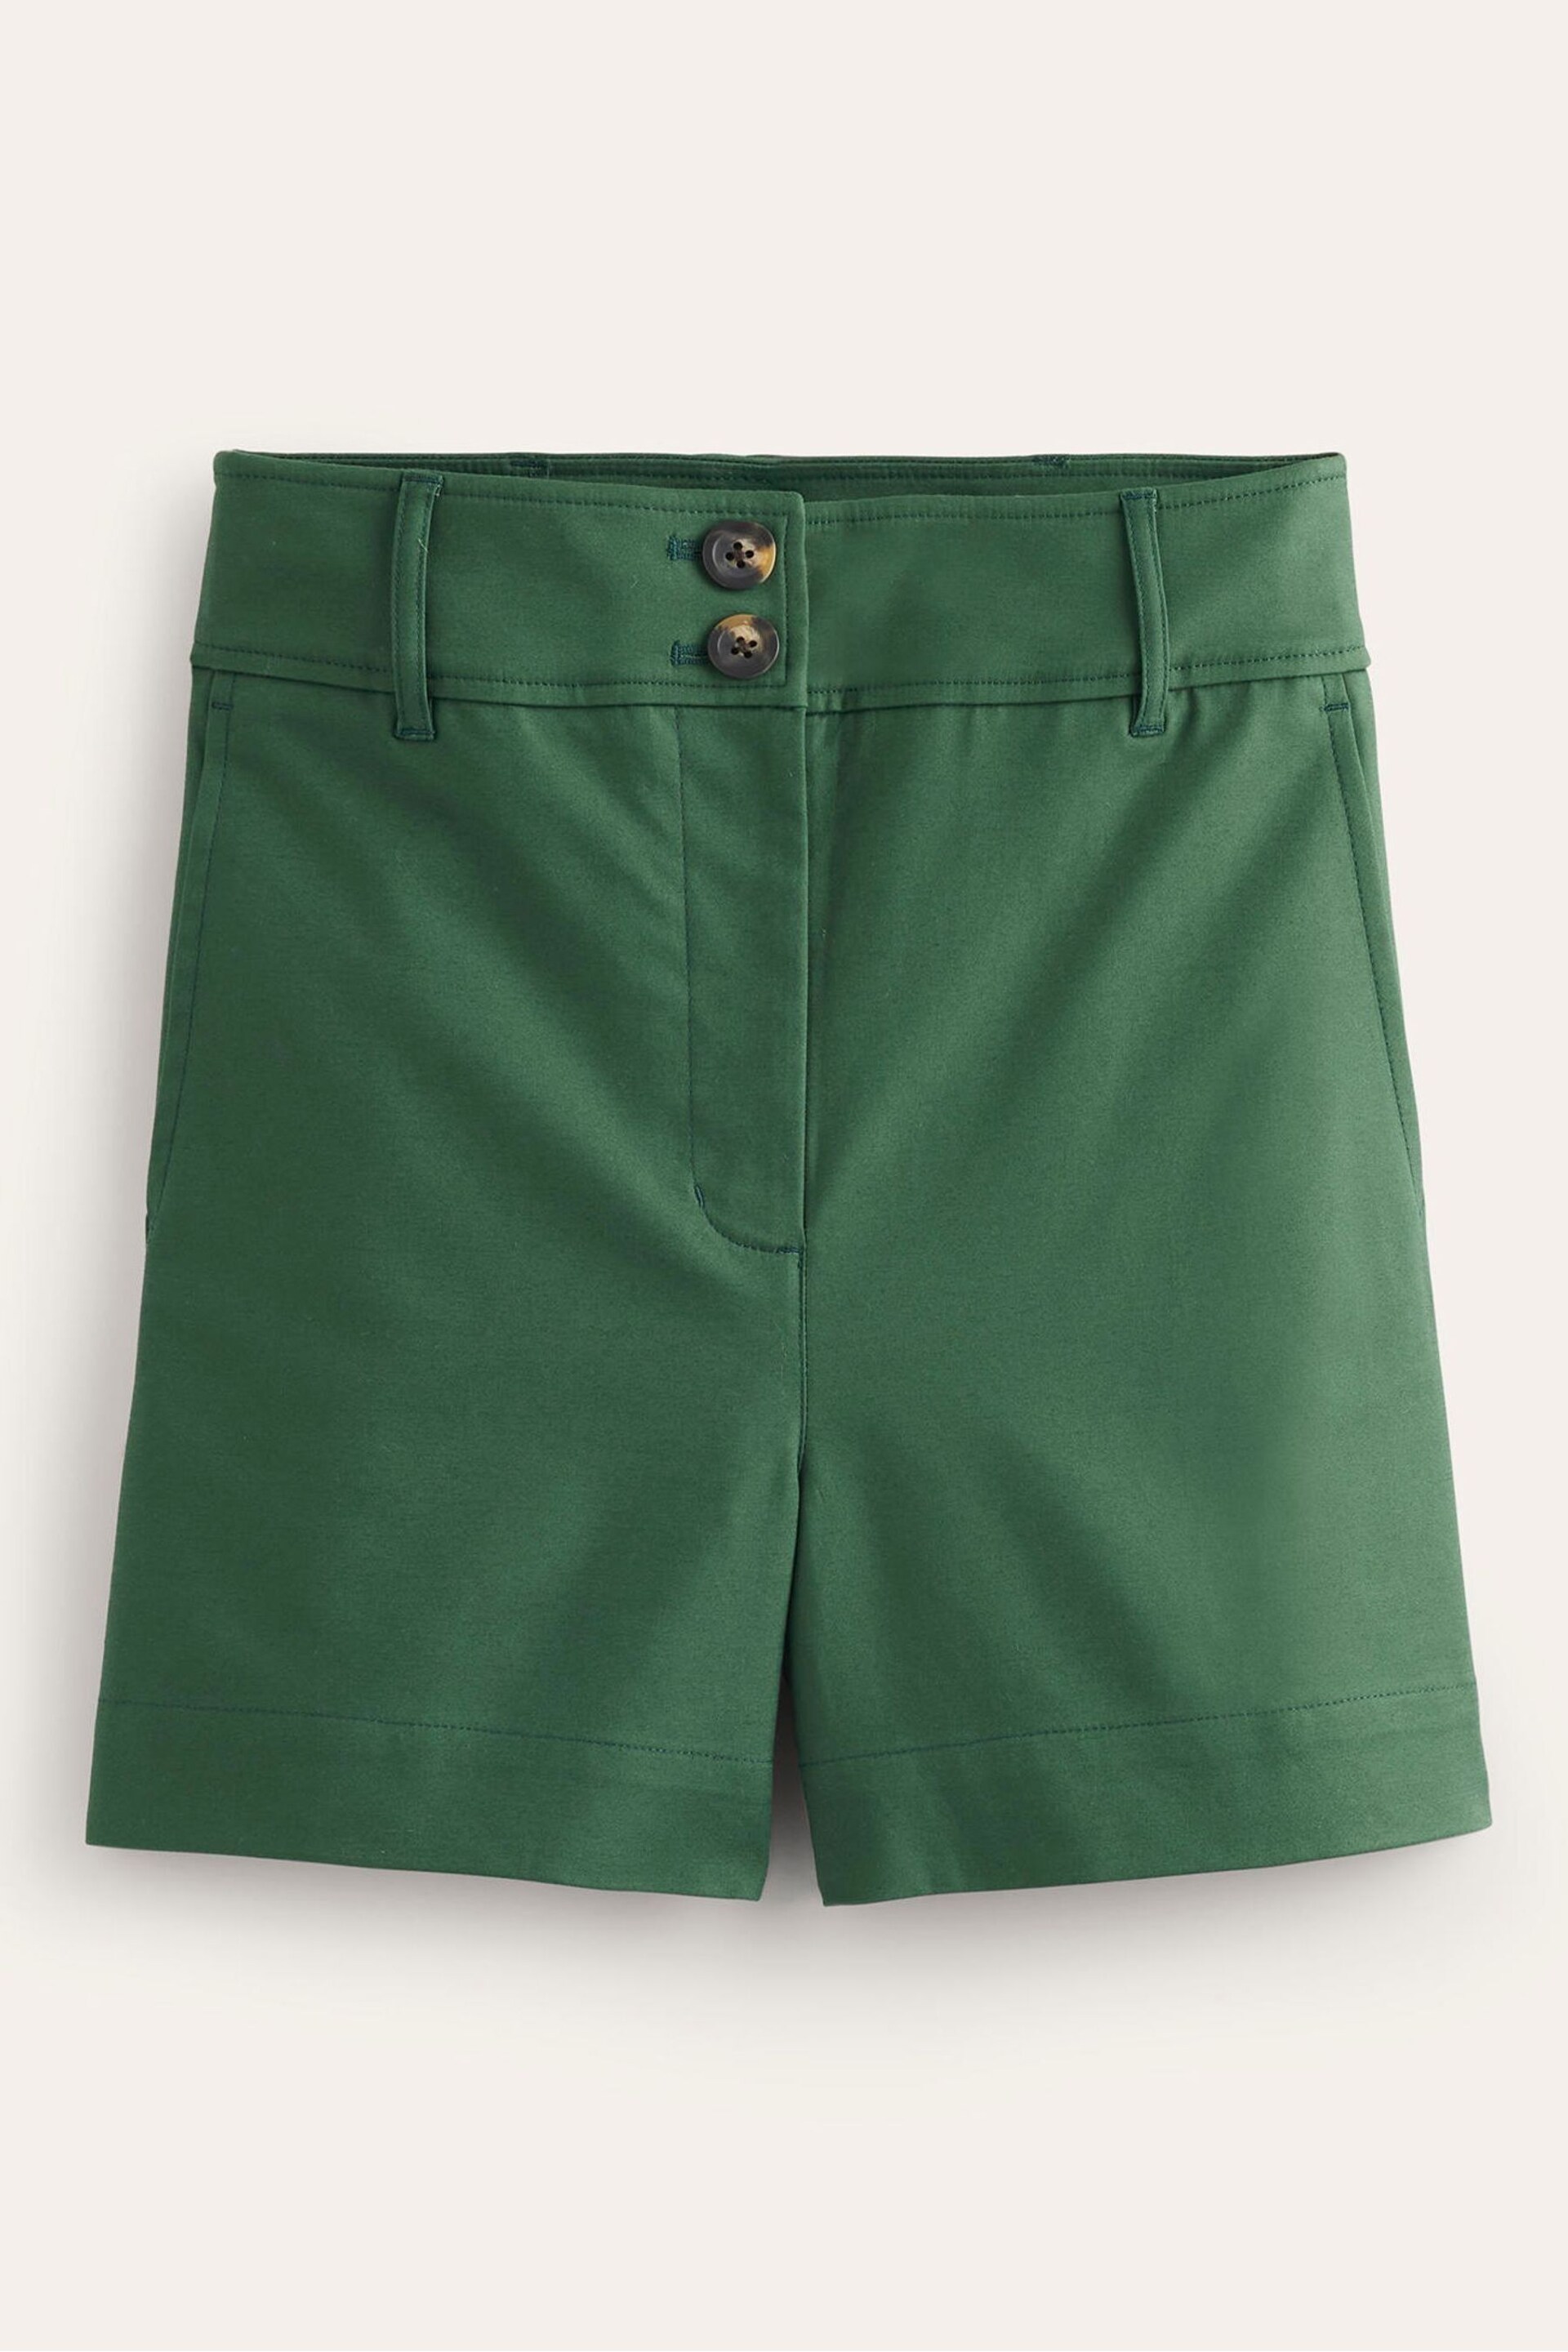 Boden Green Westbourne Sateen Shorts - Image 5 of 5